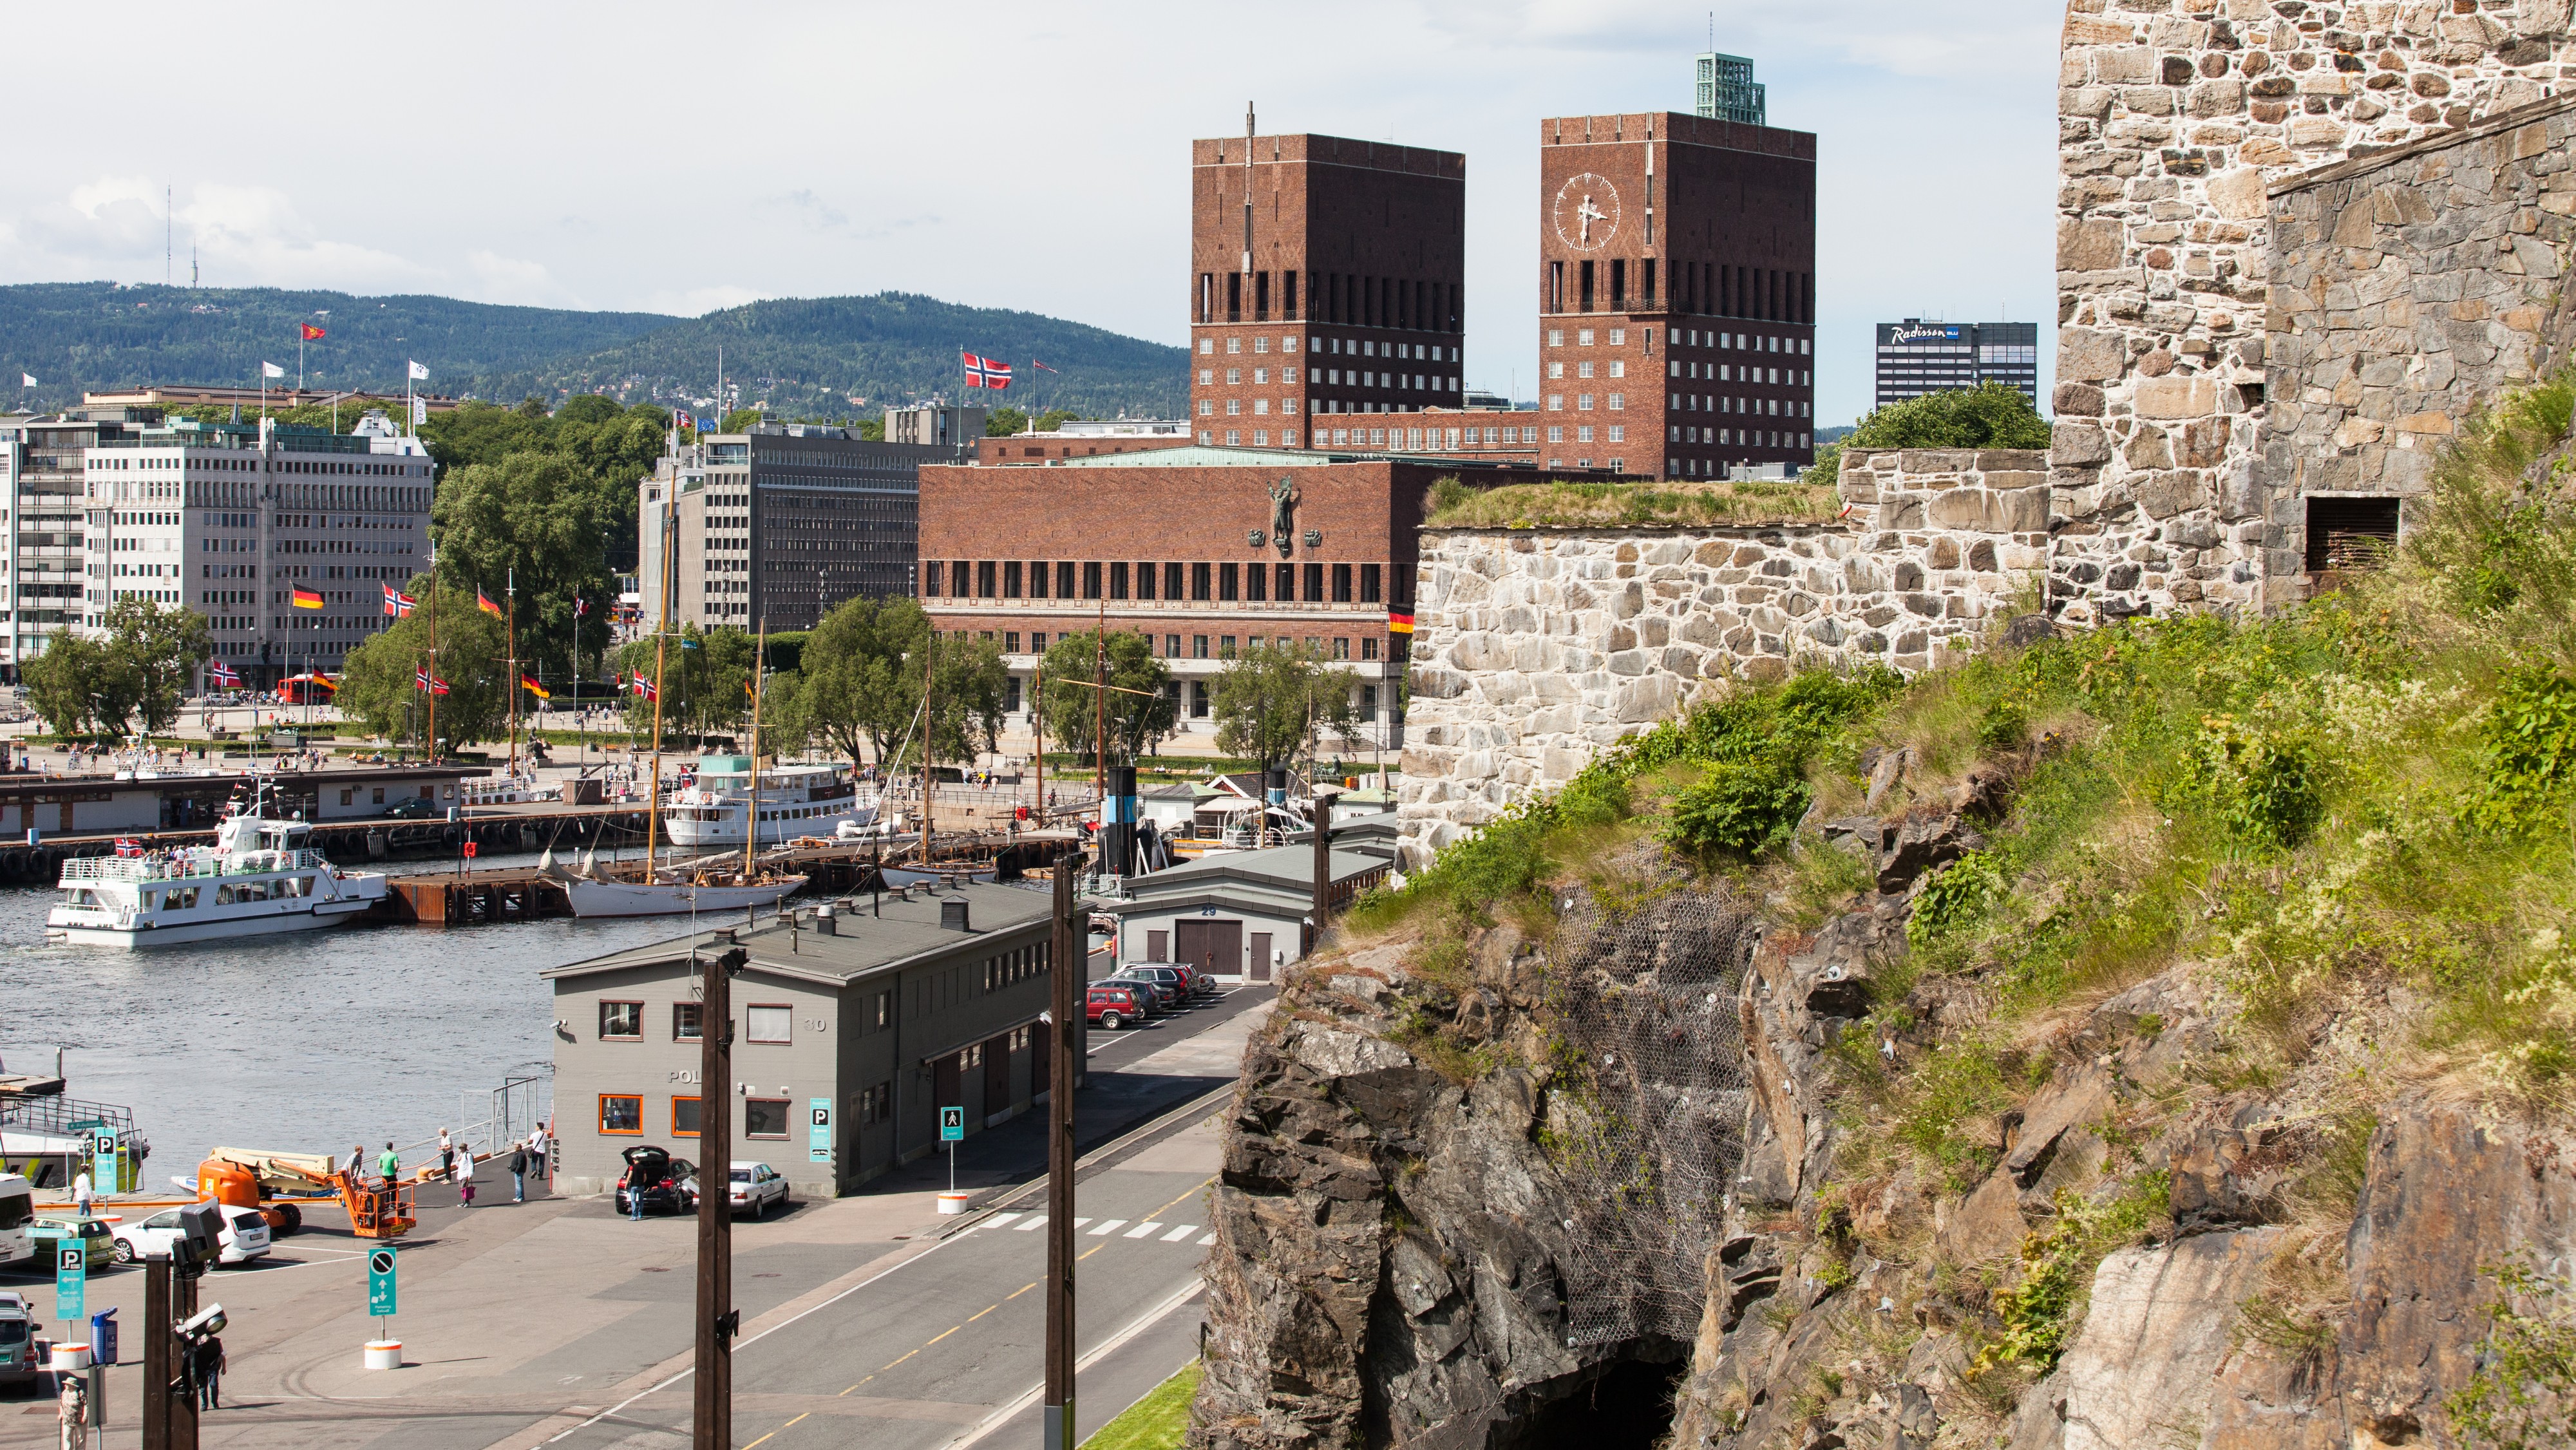 Oslo city, Norway, June 2014, picture 21